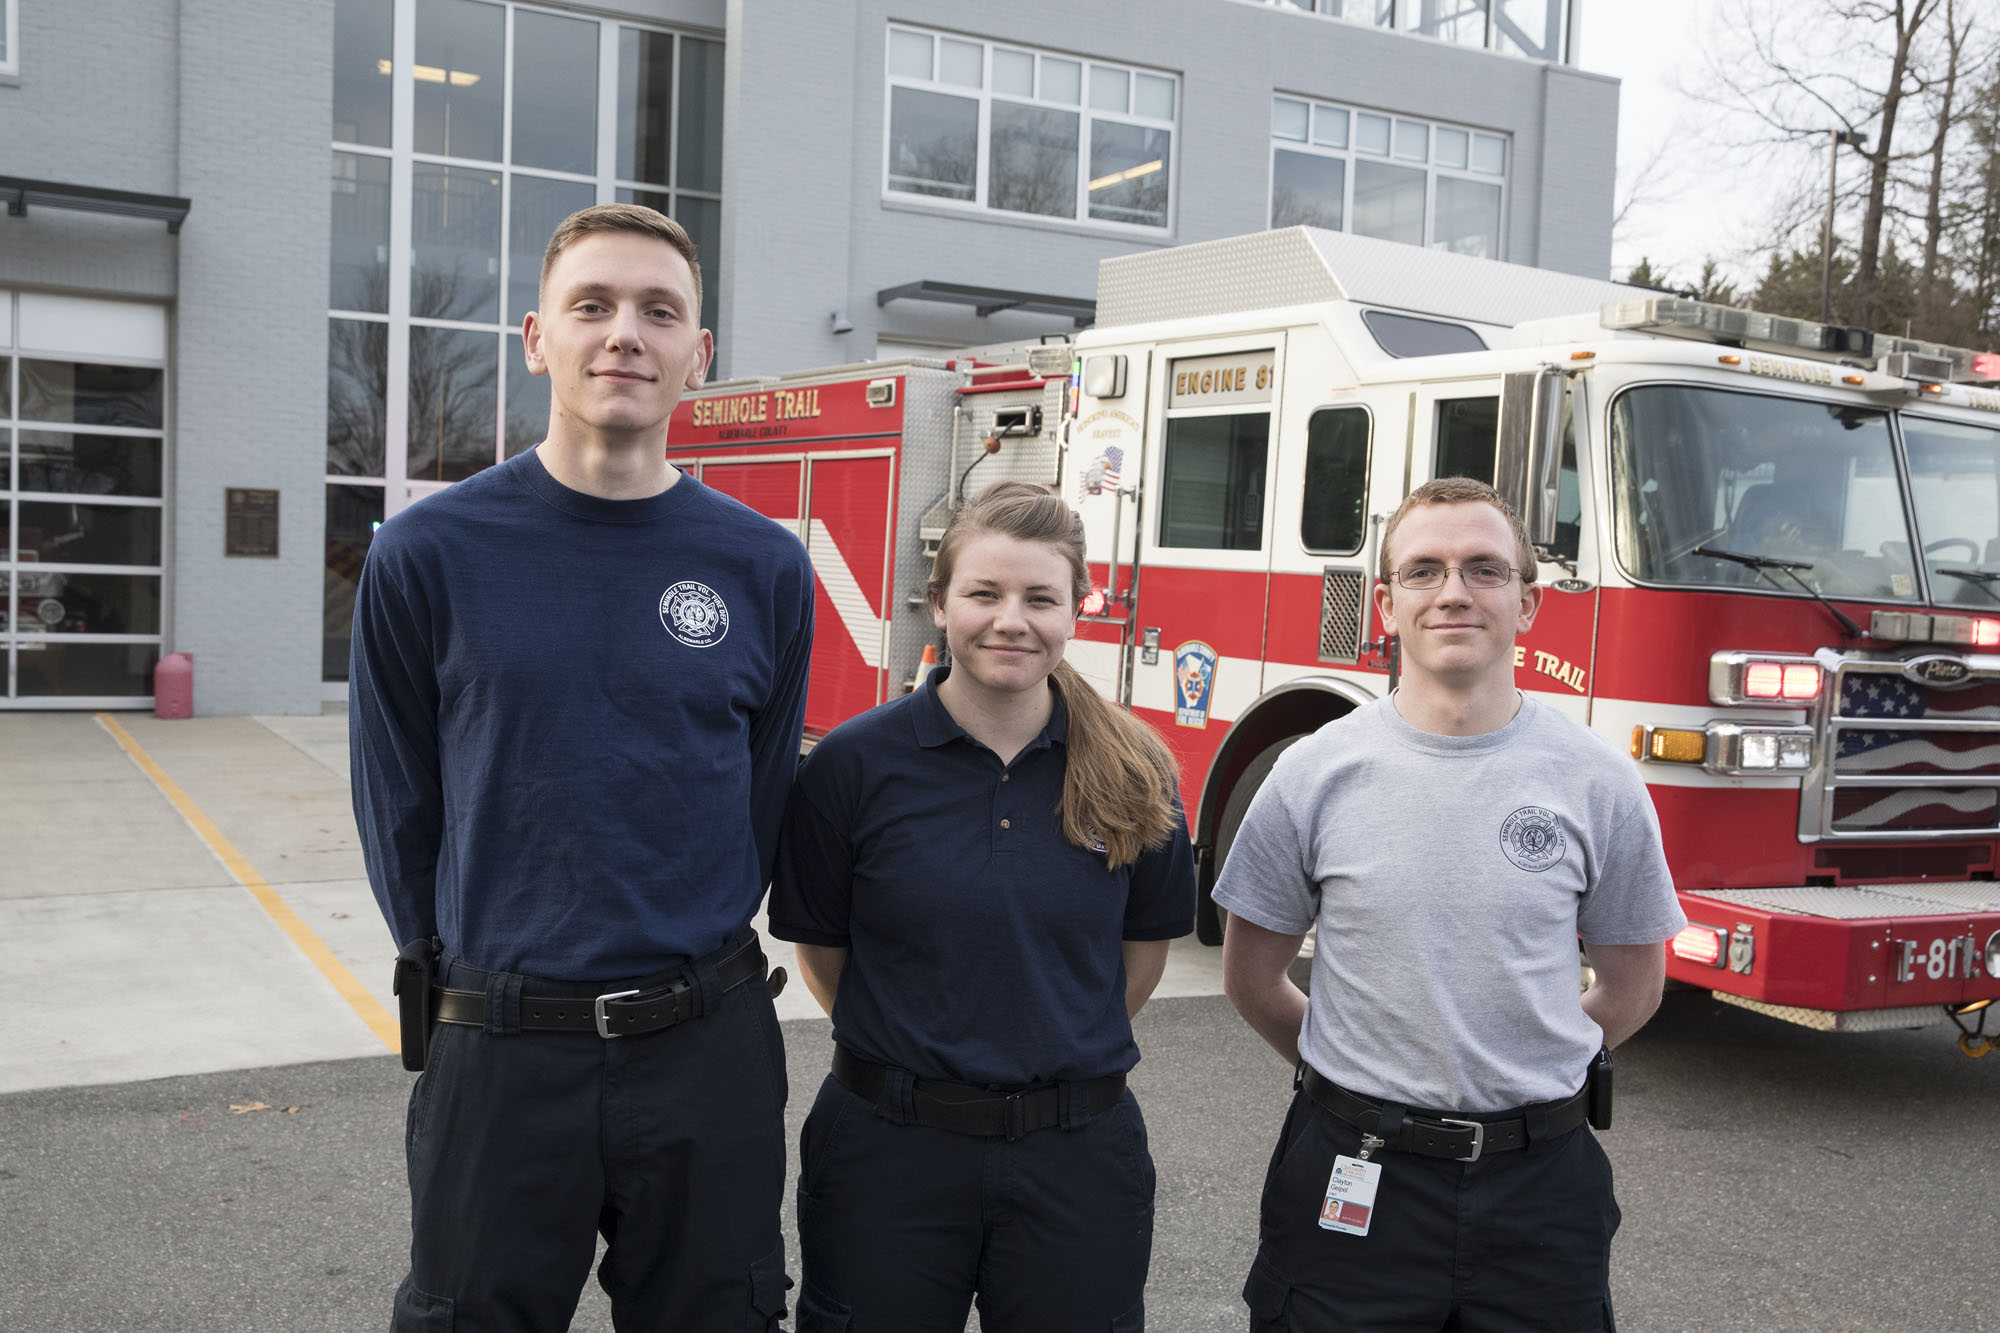 UVA students and Seminole Trail volunteer firefighters, from left to right, Jackson Muller, Alice Thomson and Clayton Geipel.